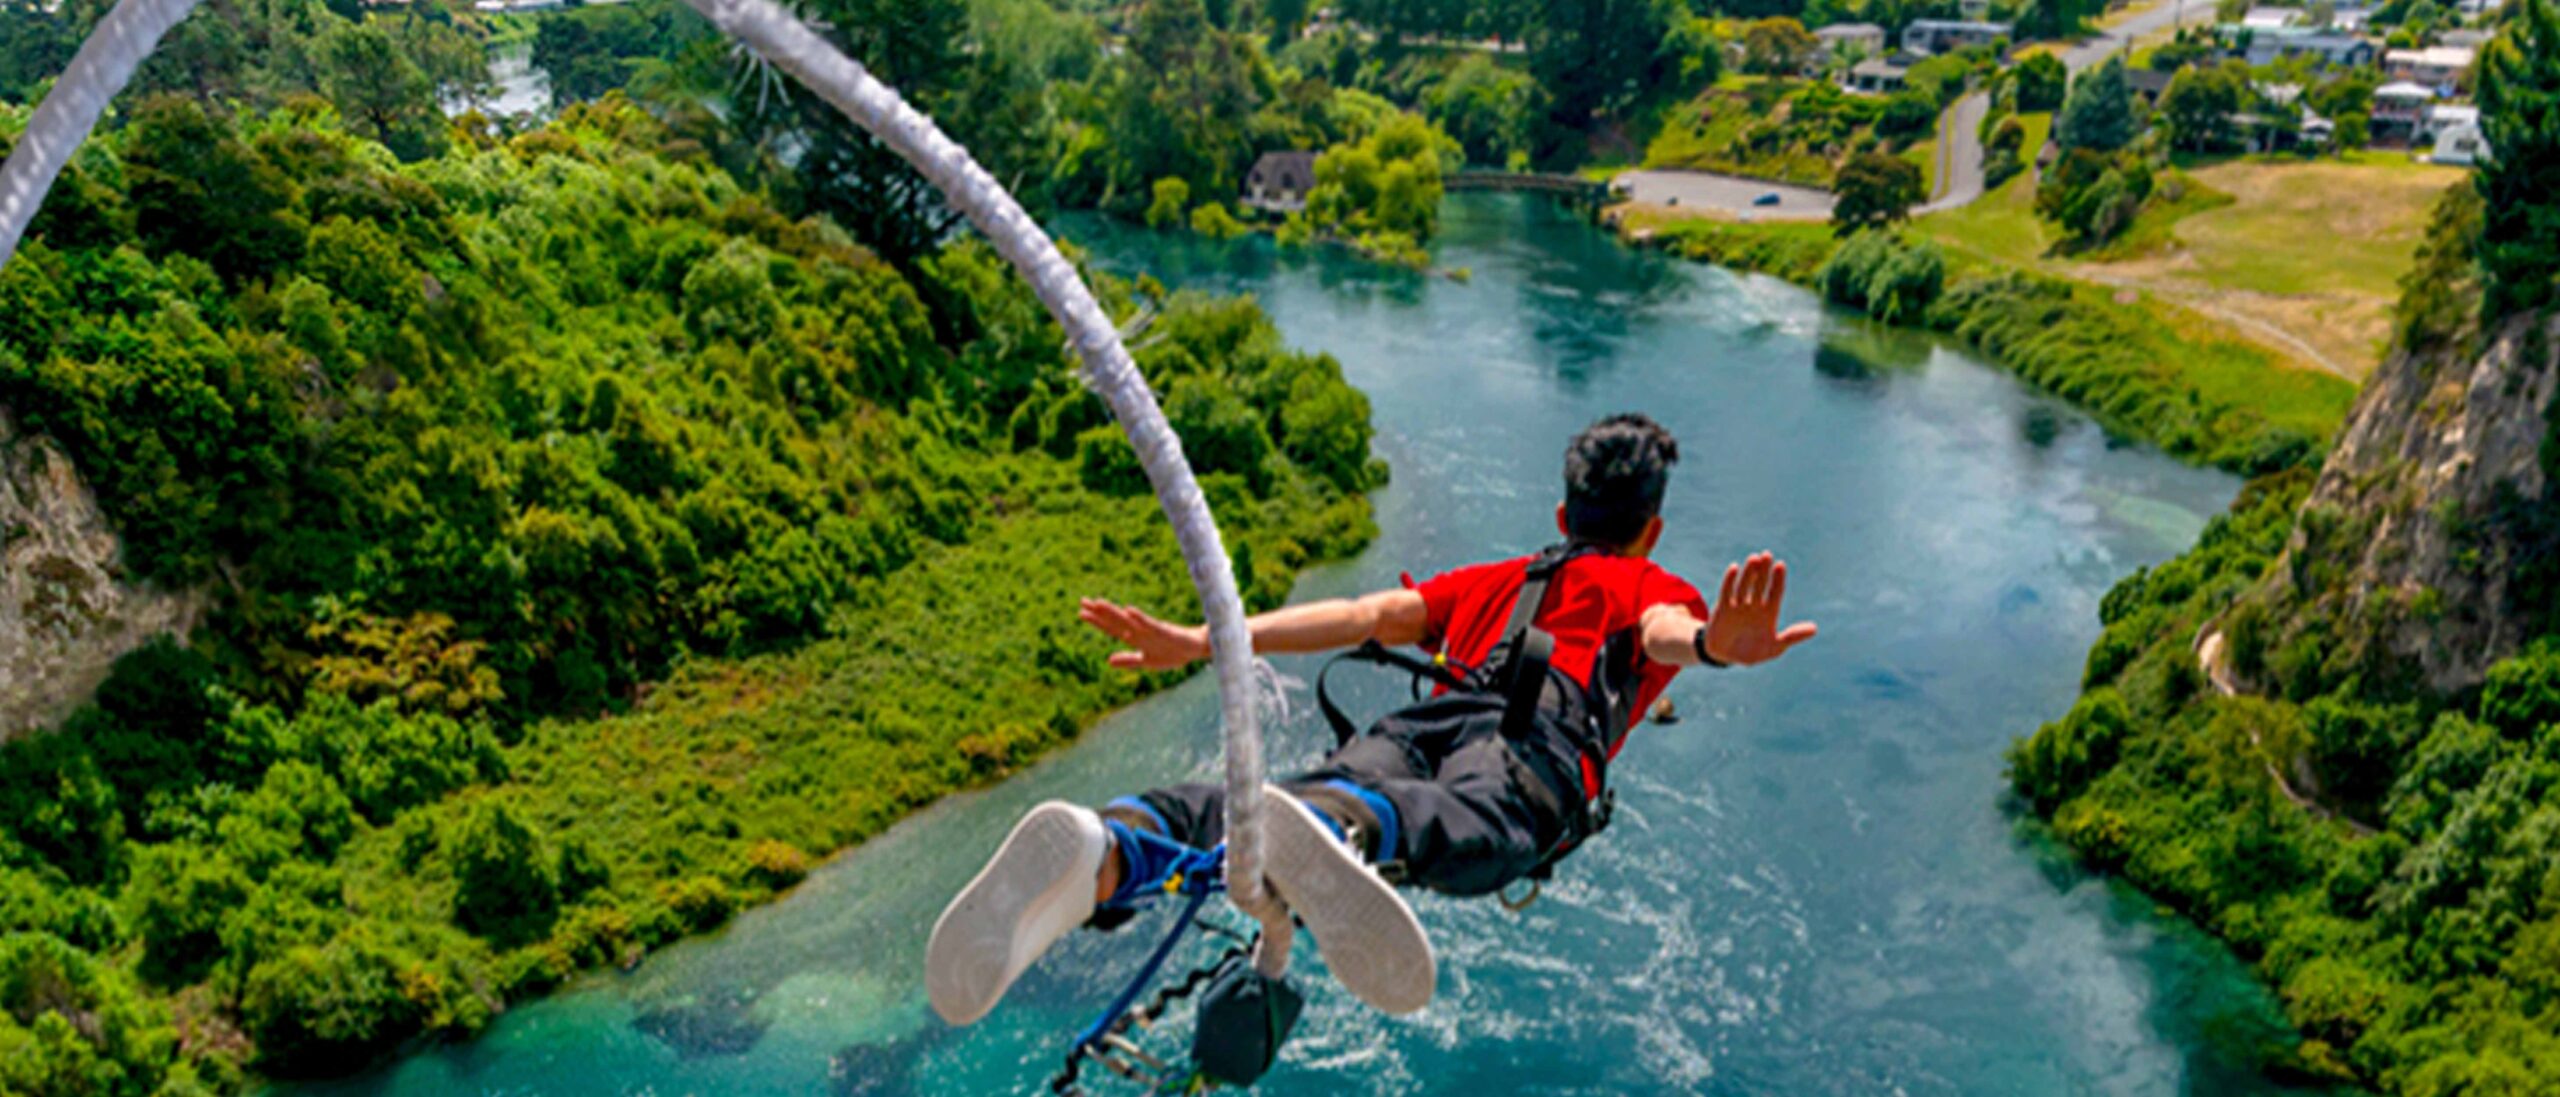 Person bungy jumping